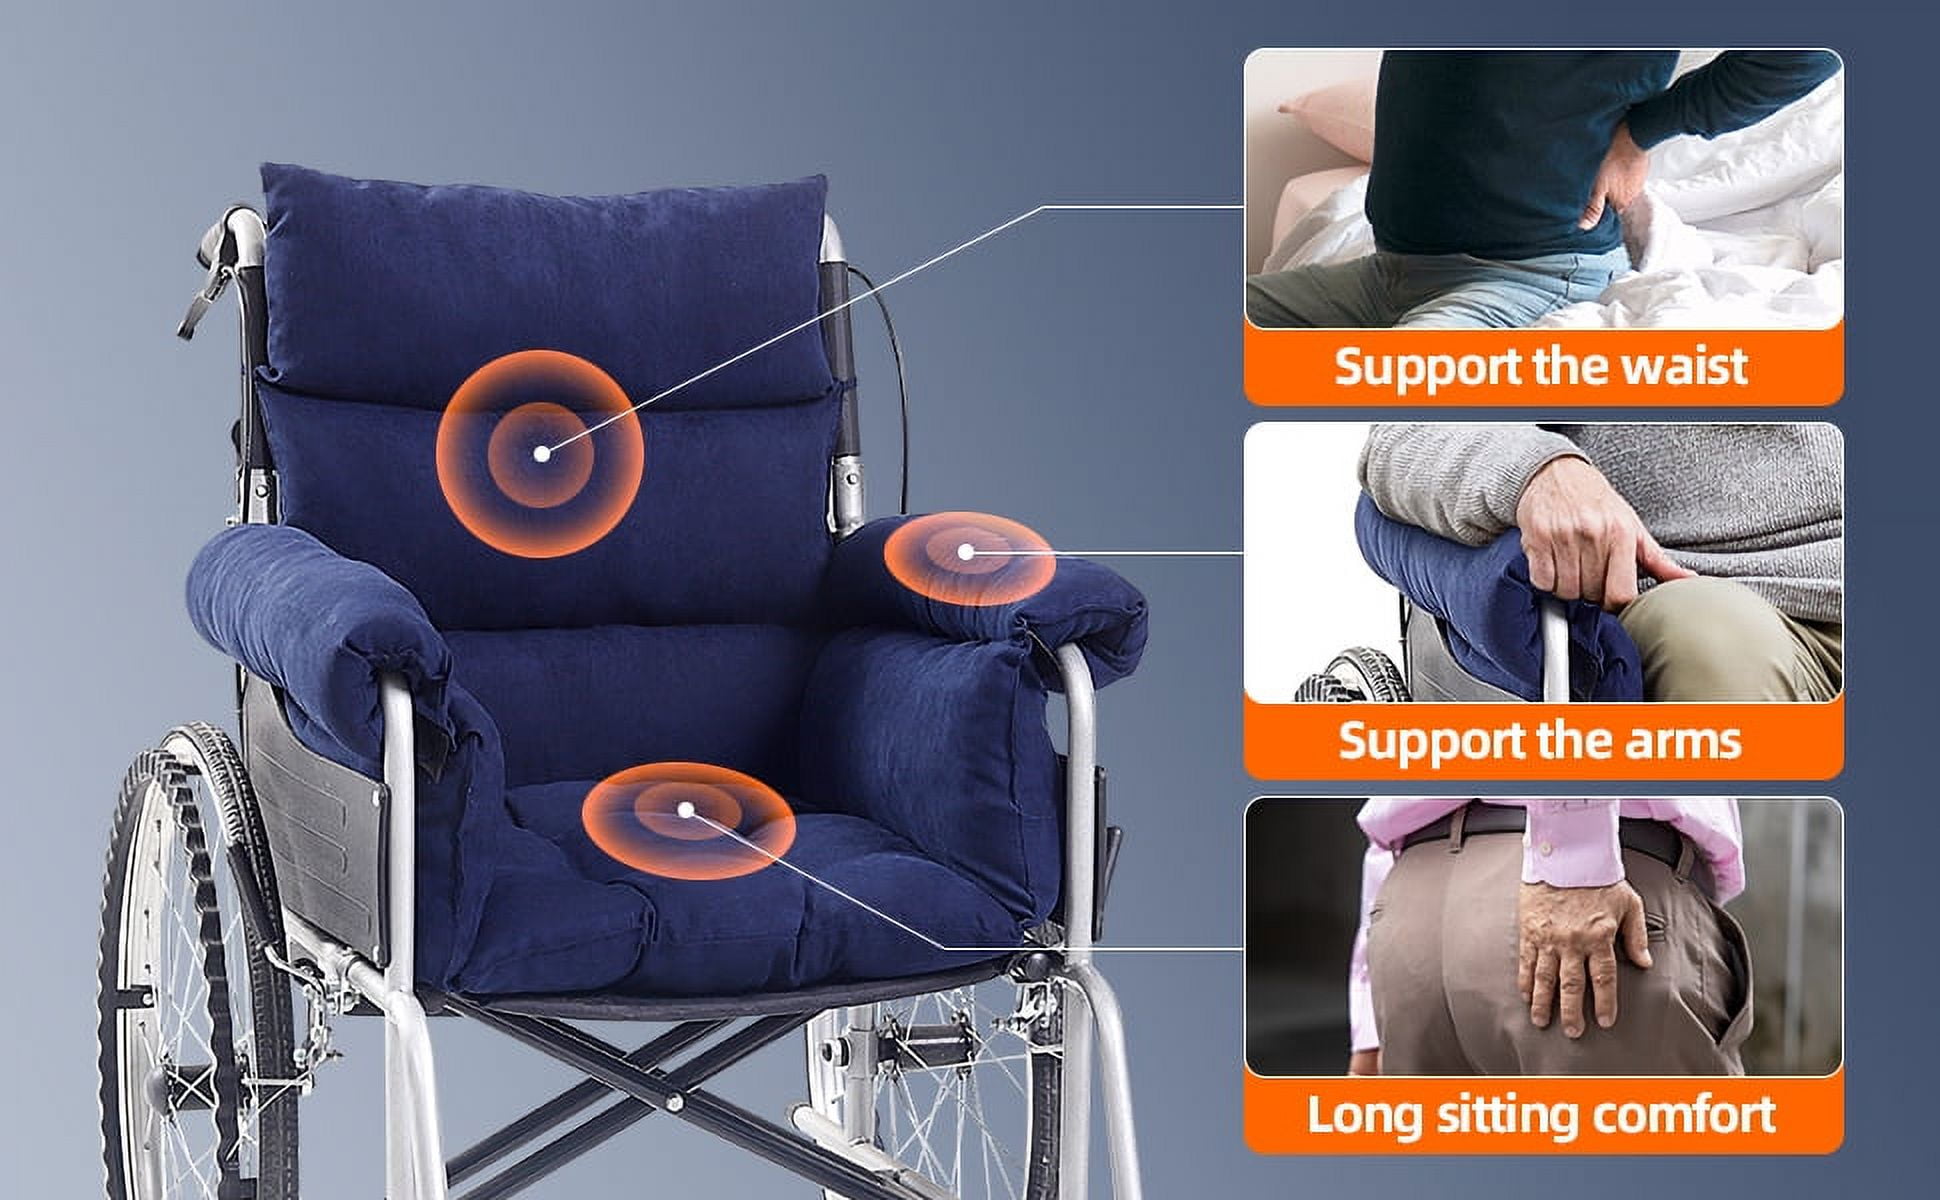 DIVECODE Wheelchair Cushion Soft Wheelchair Accessories Helps Prevent  Pressure,Armrest and Supports Coccyx& Back,Non- Slip,Suitable for 18'' and  Above